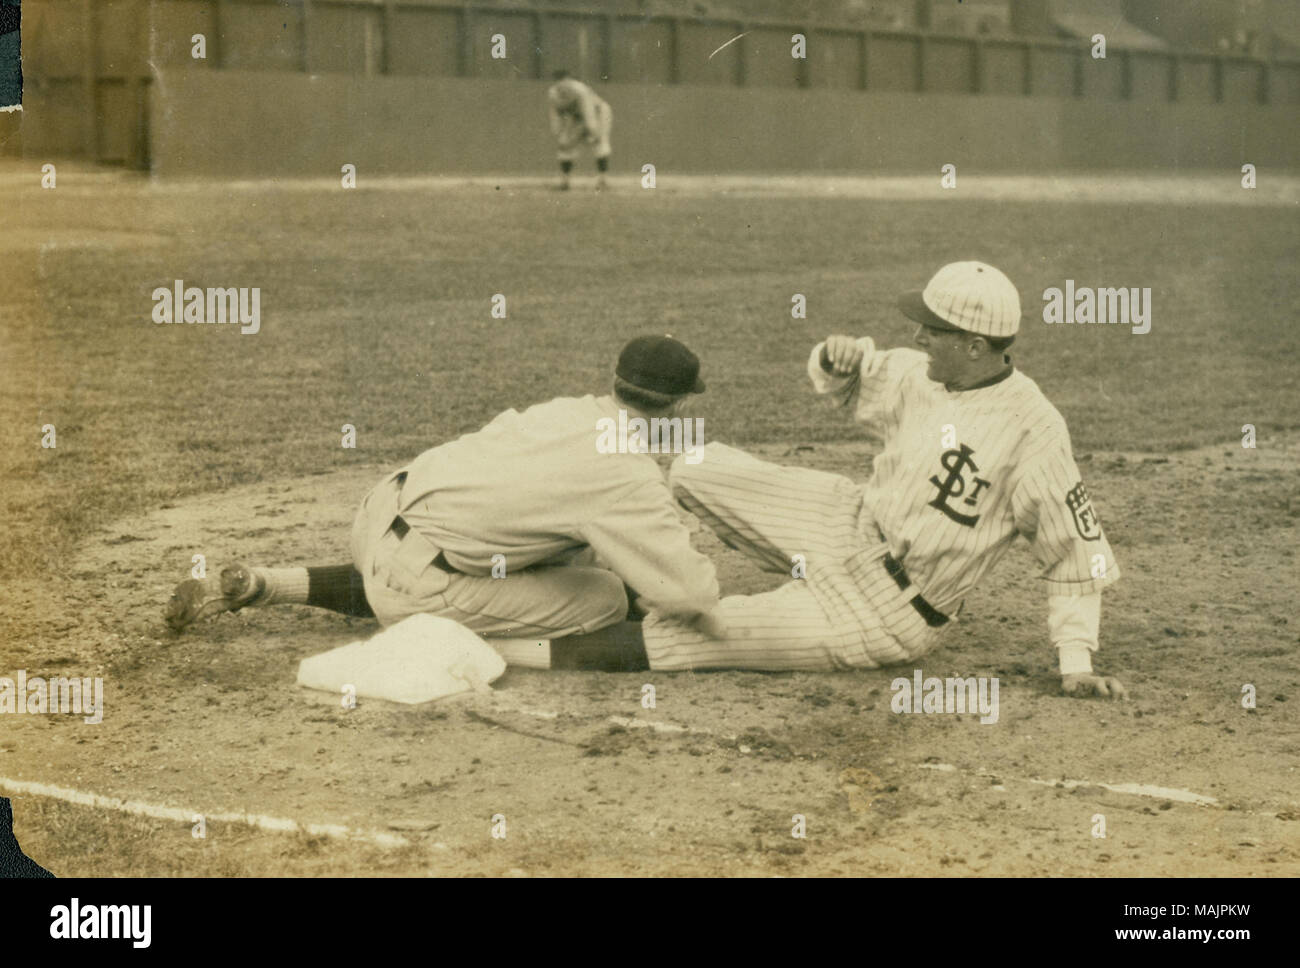 A St. Louis Terriors player is sliding into third base with the third baseman there trying to tag him out. Can also see the center fielder. Title: A member of the St. Louis Terriers baseball team (Federal League) slides into third base during a game.  . between 1914 and 1915. Russell Froelich Stock Photo